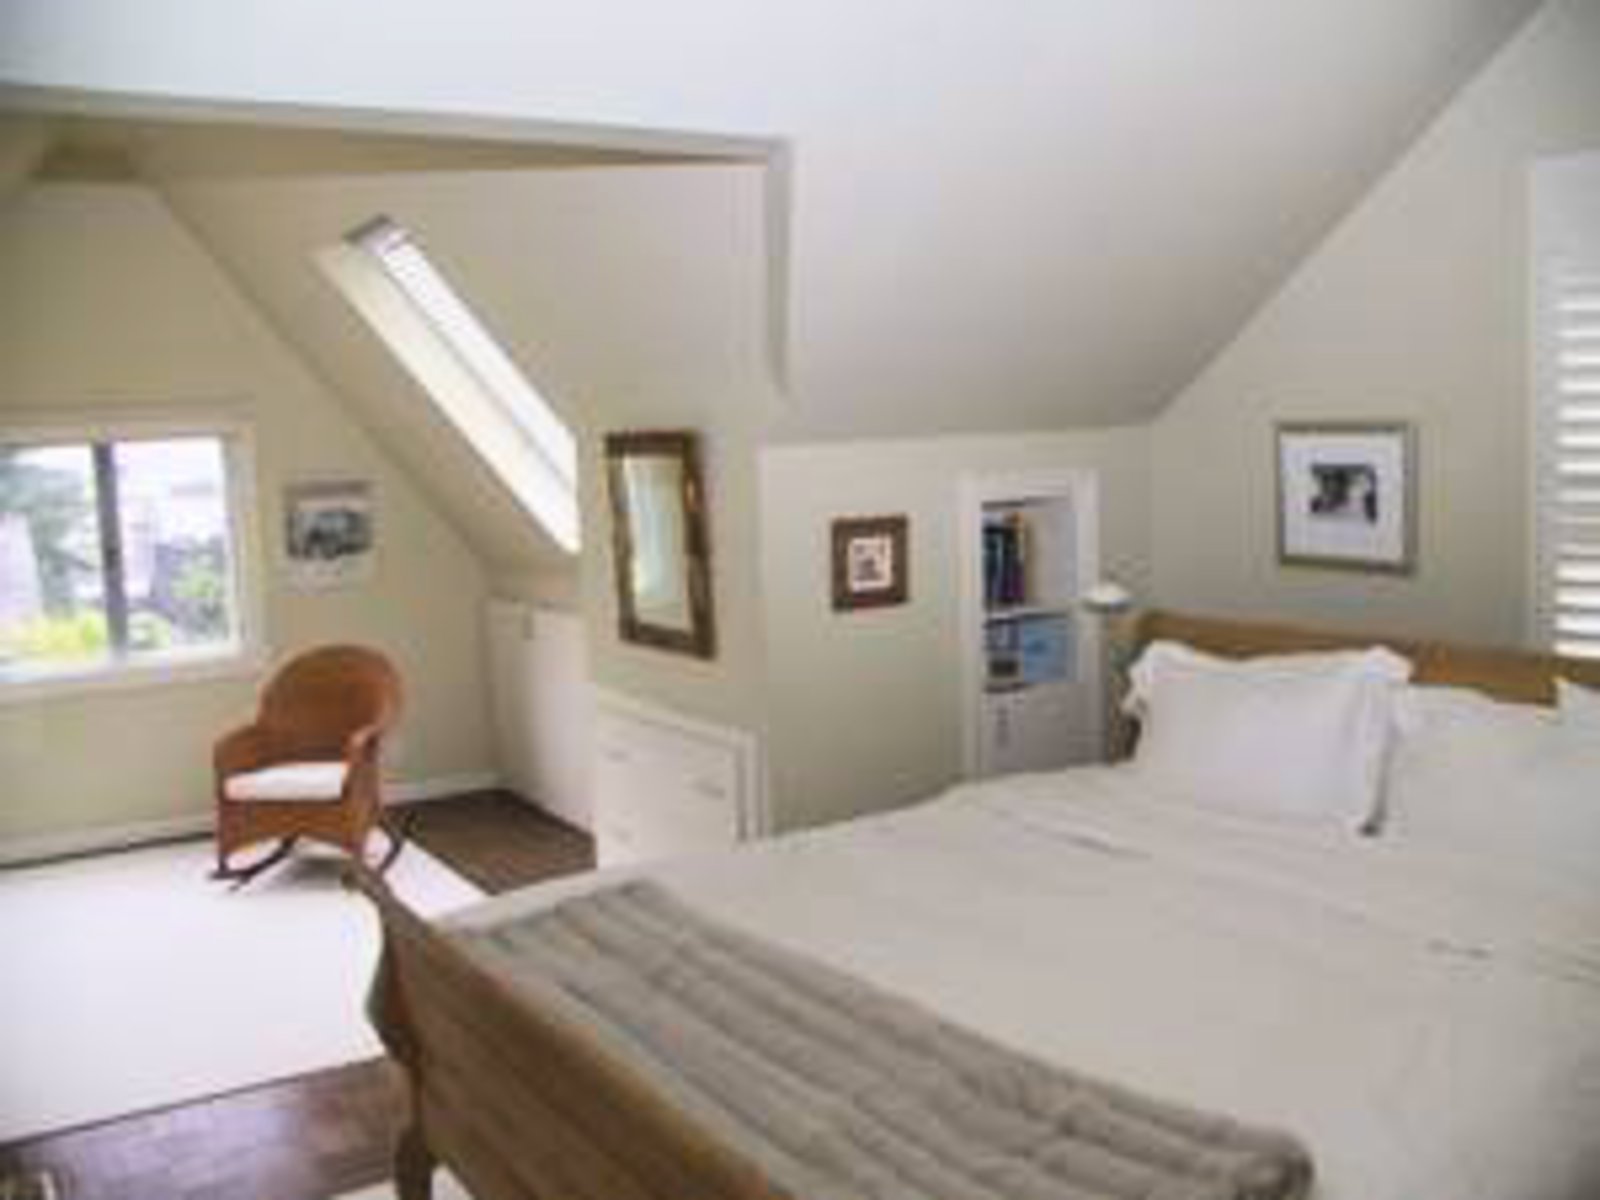 Master Bedroom Spacious master bedroom with separate sitting area with view of Lions Gate Bridge and Harbour.  Skylights, hardwood floors and built-in cabinetry